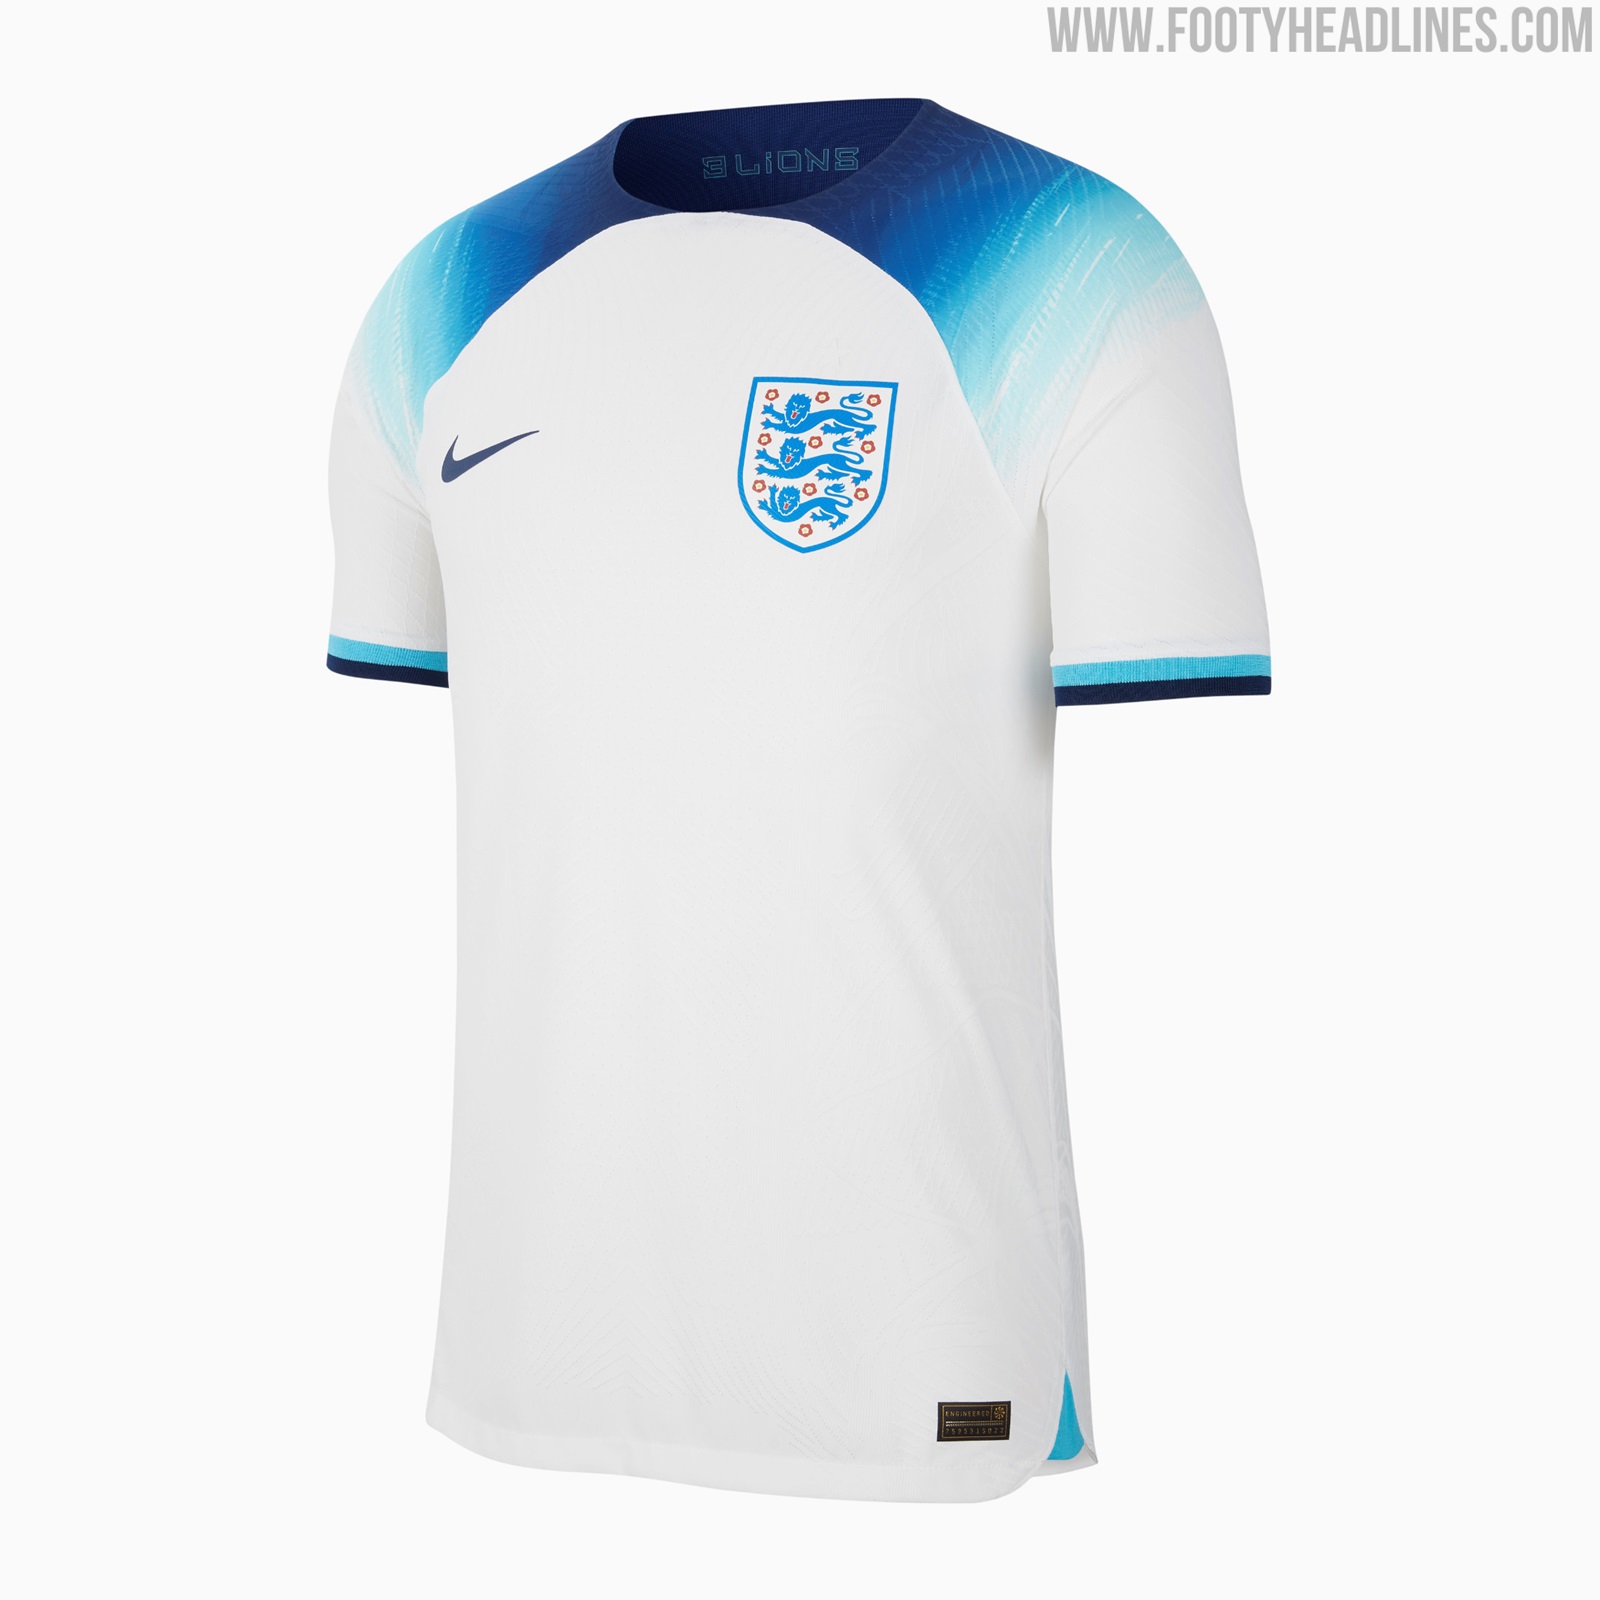 England 2022 World Cup Home and Away Kits Released